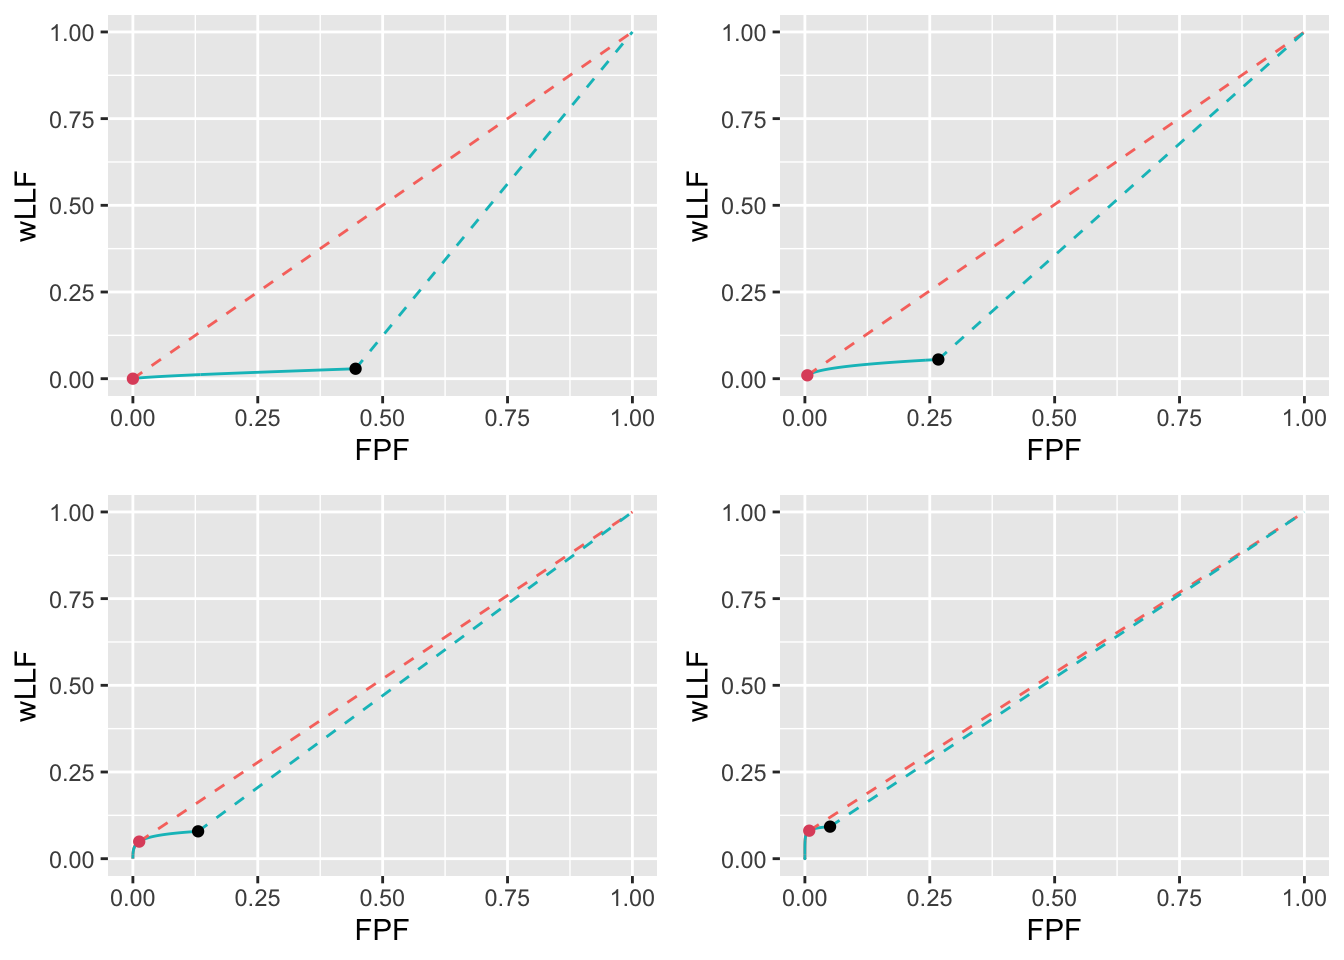 Low performance varying $\mu$ wAFROC plots for the two optimization methods with superimposed operating points with superimposed operating points. The color coding is as in previous figures. The values of $\mu$ are: top-left $\mu = 1$, top-right $\mu = 2$, bottom-left $\mu = 3$ and bottom-right $\mu = 4$.